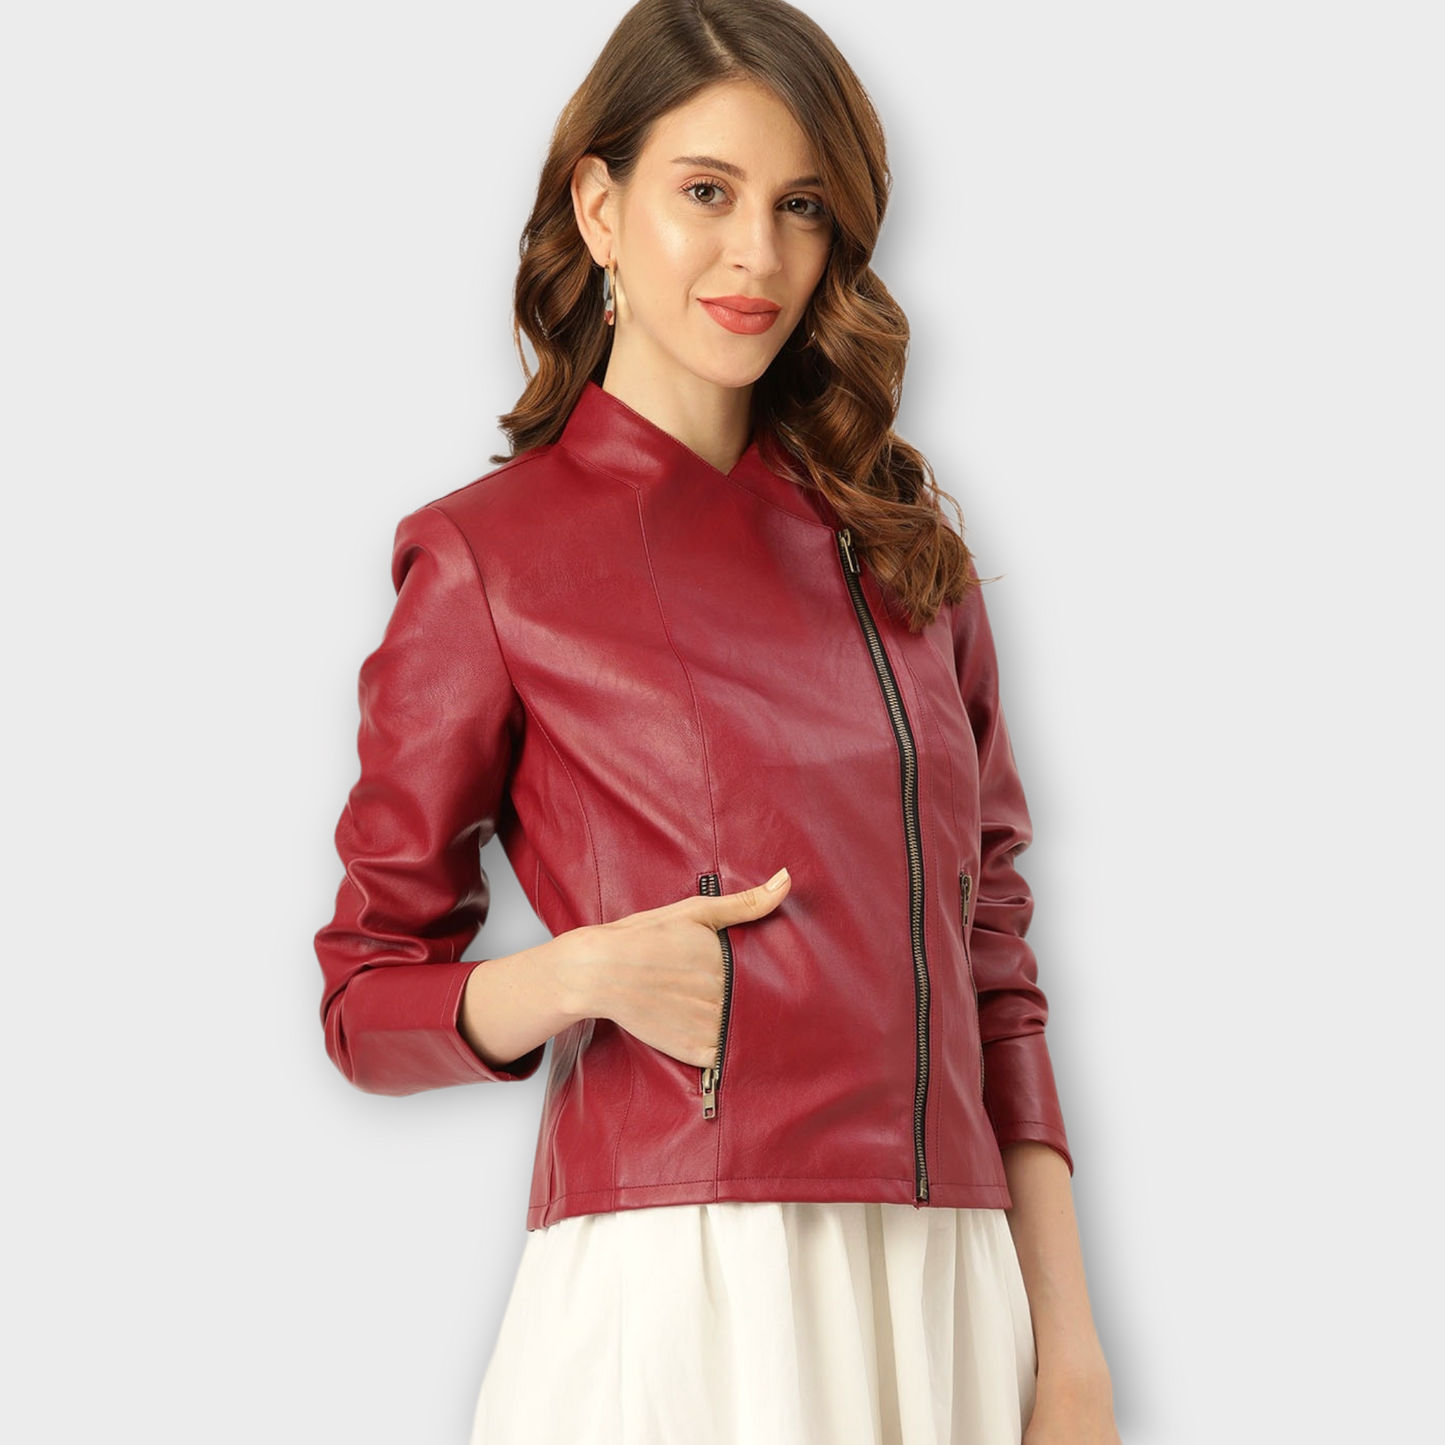 Red Lambskin Leather Biker Jacket Leather Cropped Jacket Leather Coat Slim Fit Leather Jacket | Red Leather Jacket| Christmas Gift for Her